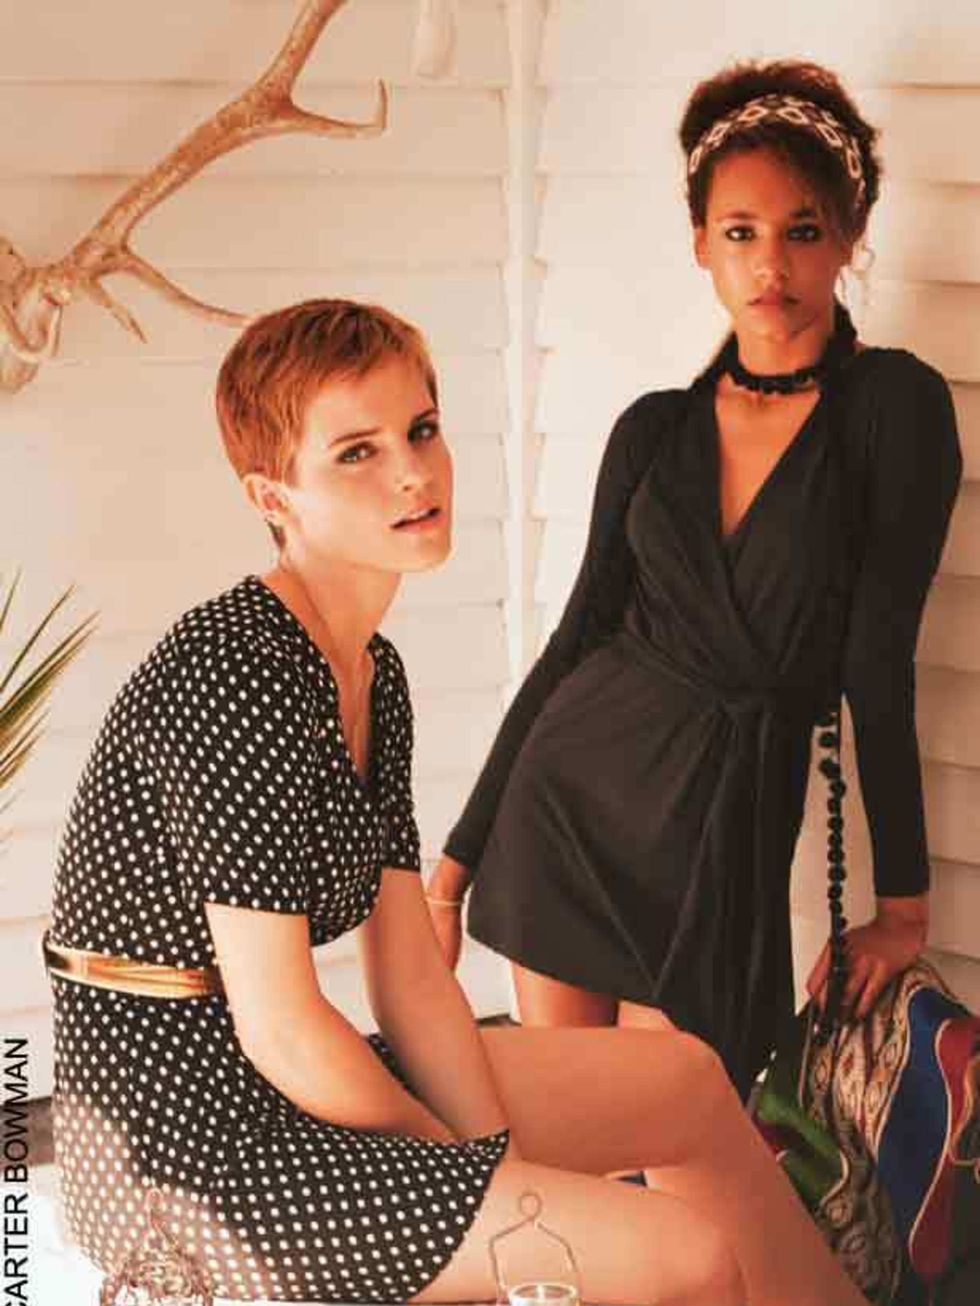 <p>Looking pretty in polka-dots, <a href="http://www.elleuk.com/starstyle/style-files/%28section%29/emma-watson">Emma Watson</a> models her final collection for People Tree</p>